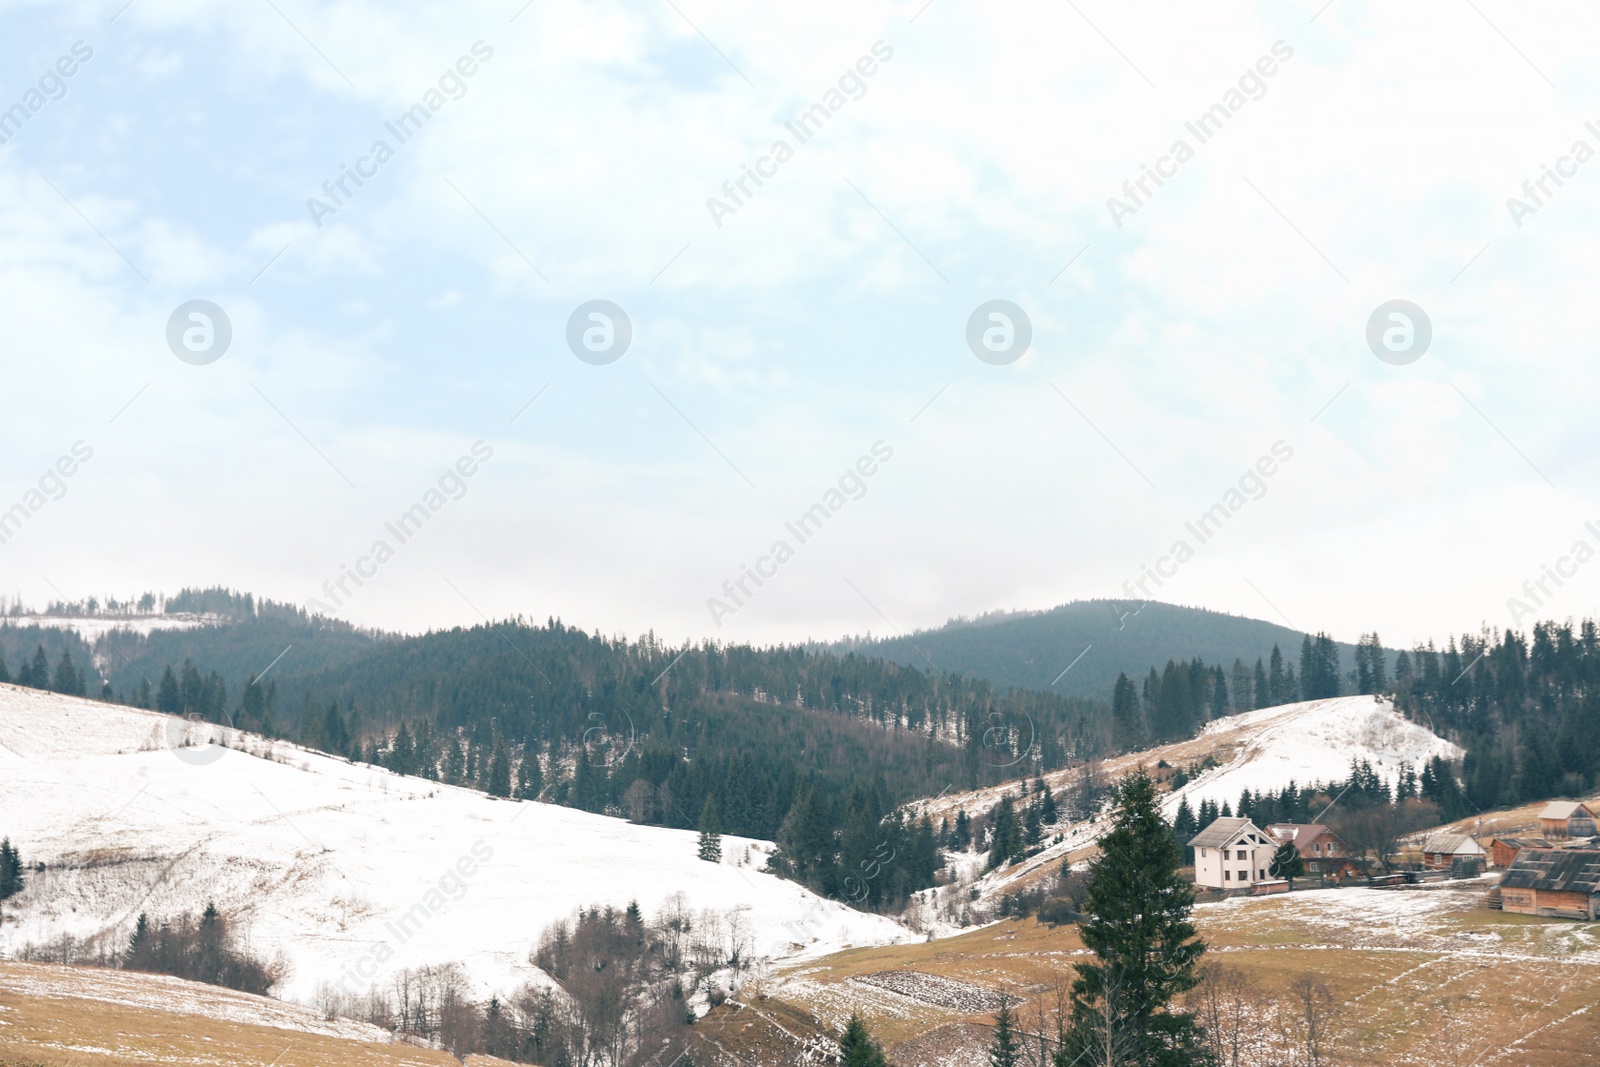 Photo of Beautiful winter landscape with buildings and forest on snowy hills